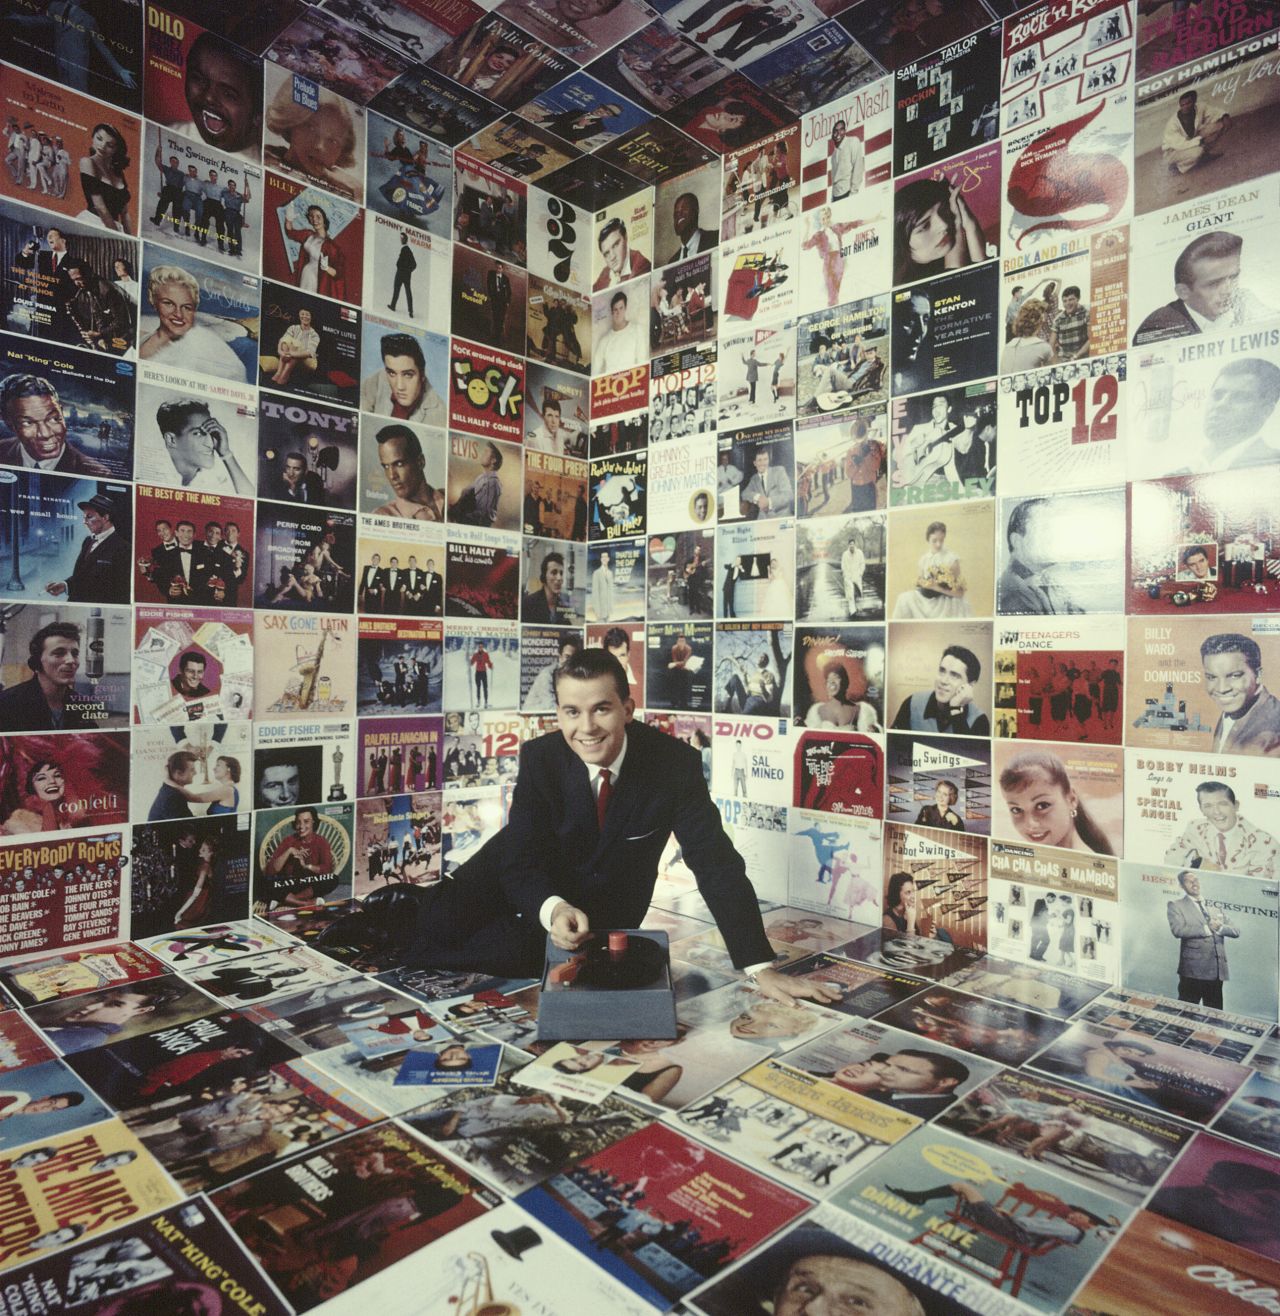 Clark sits in a room decorated floor to ceiling with record album covers circa 1958.